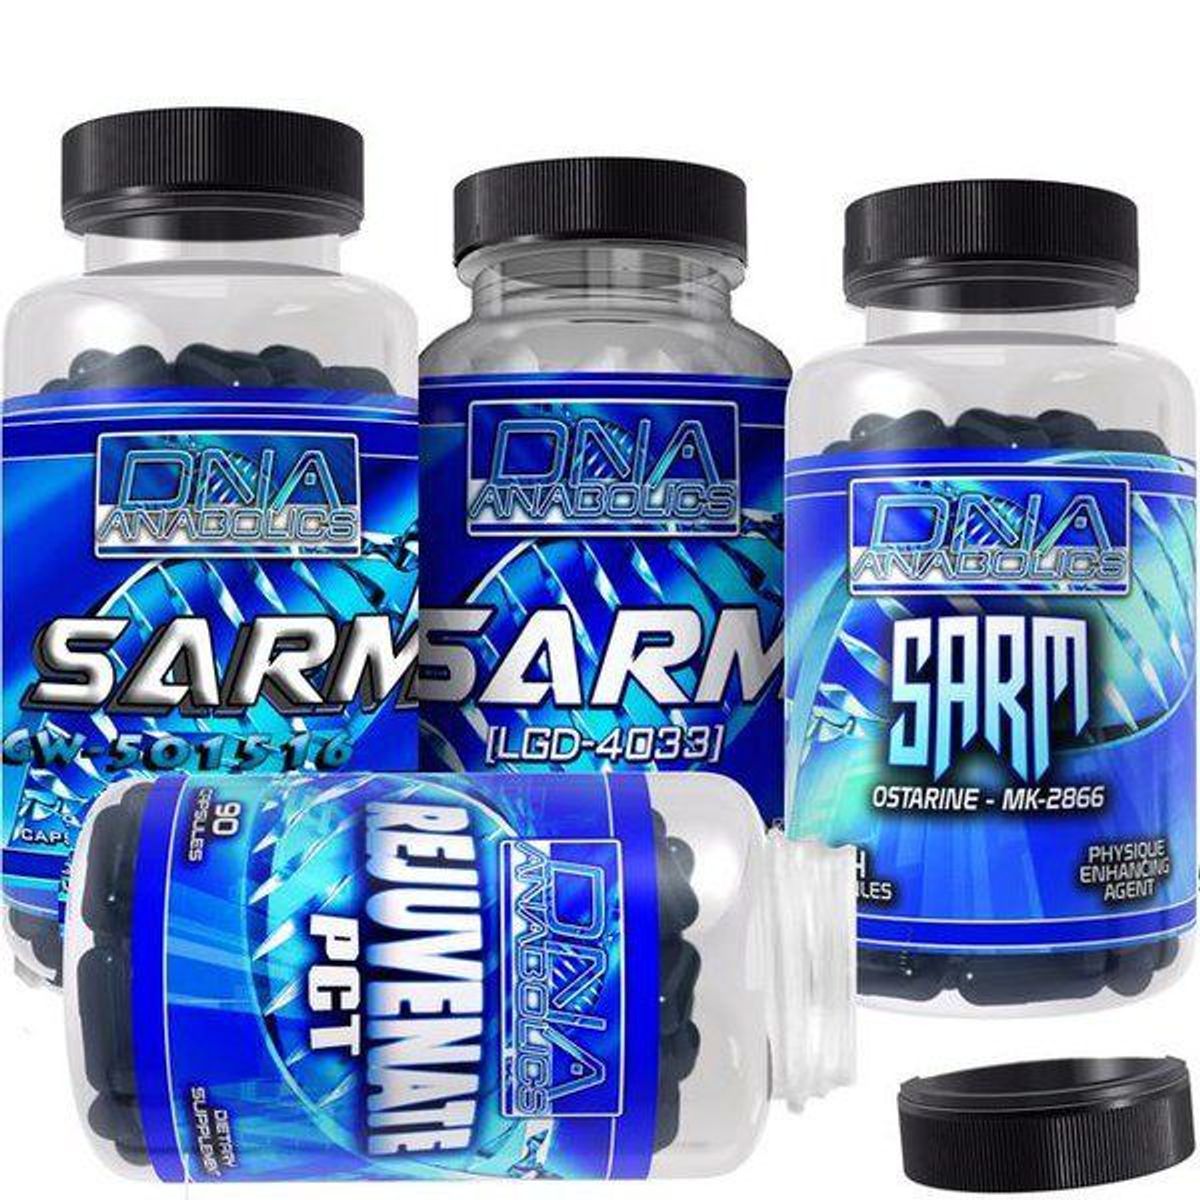 My Experience With SARMS